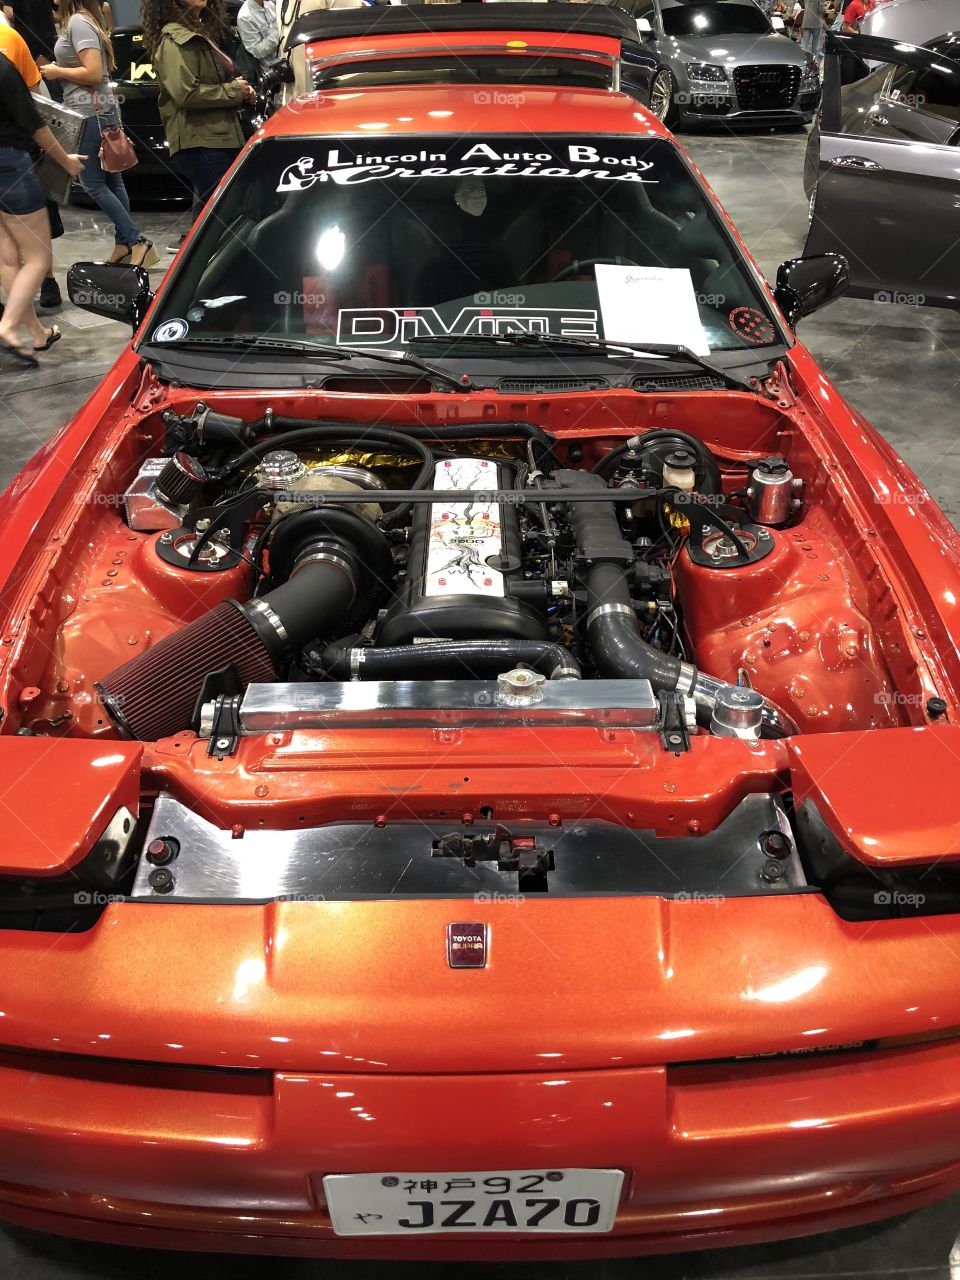 Here’s a Toyota Supra mk3 with a swap 2jz motor and it’s amazing with the cam cover detail